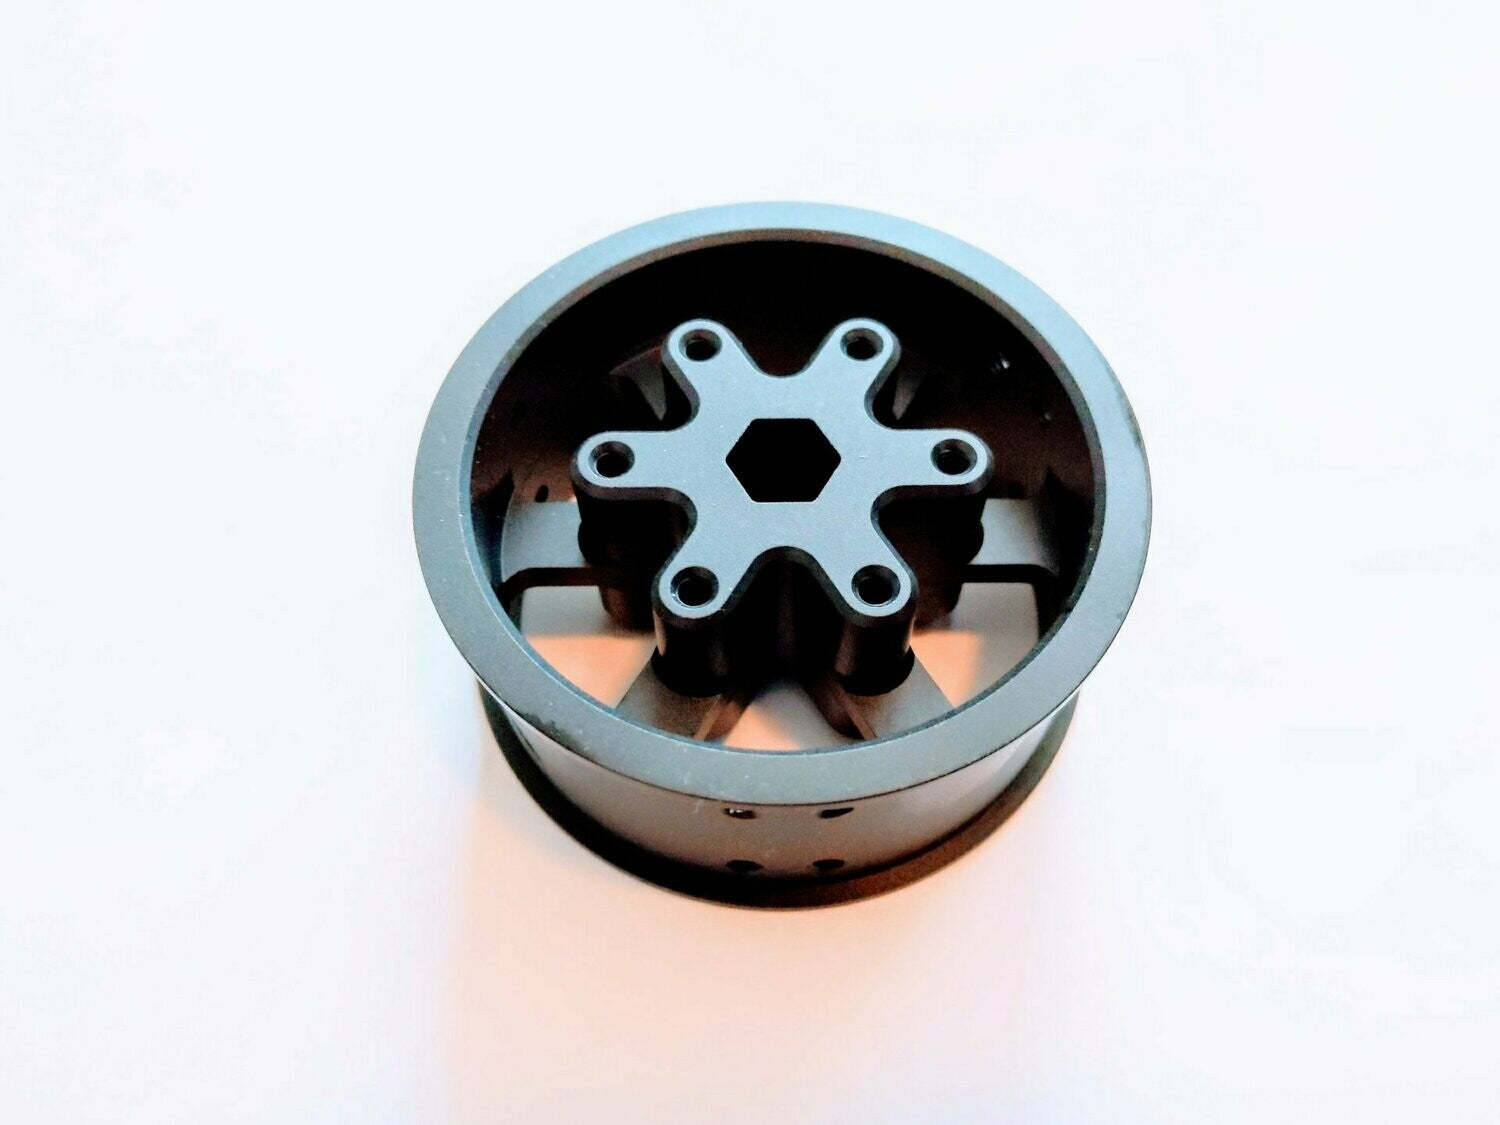 3 Inch Aluminum Billet Wheel For Discontinued Thrifty Swerve